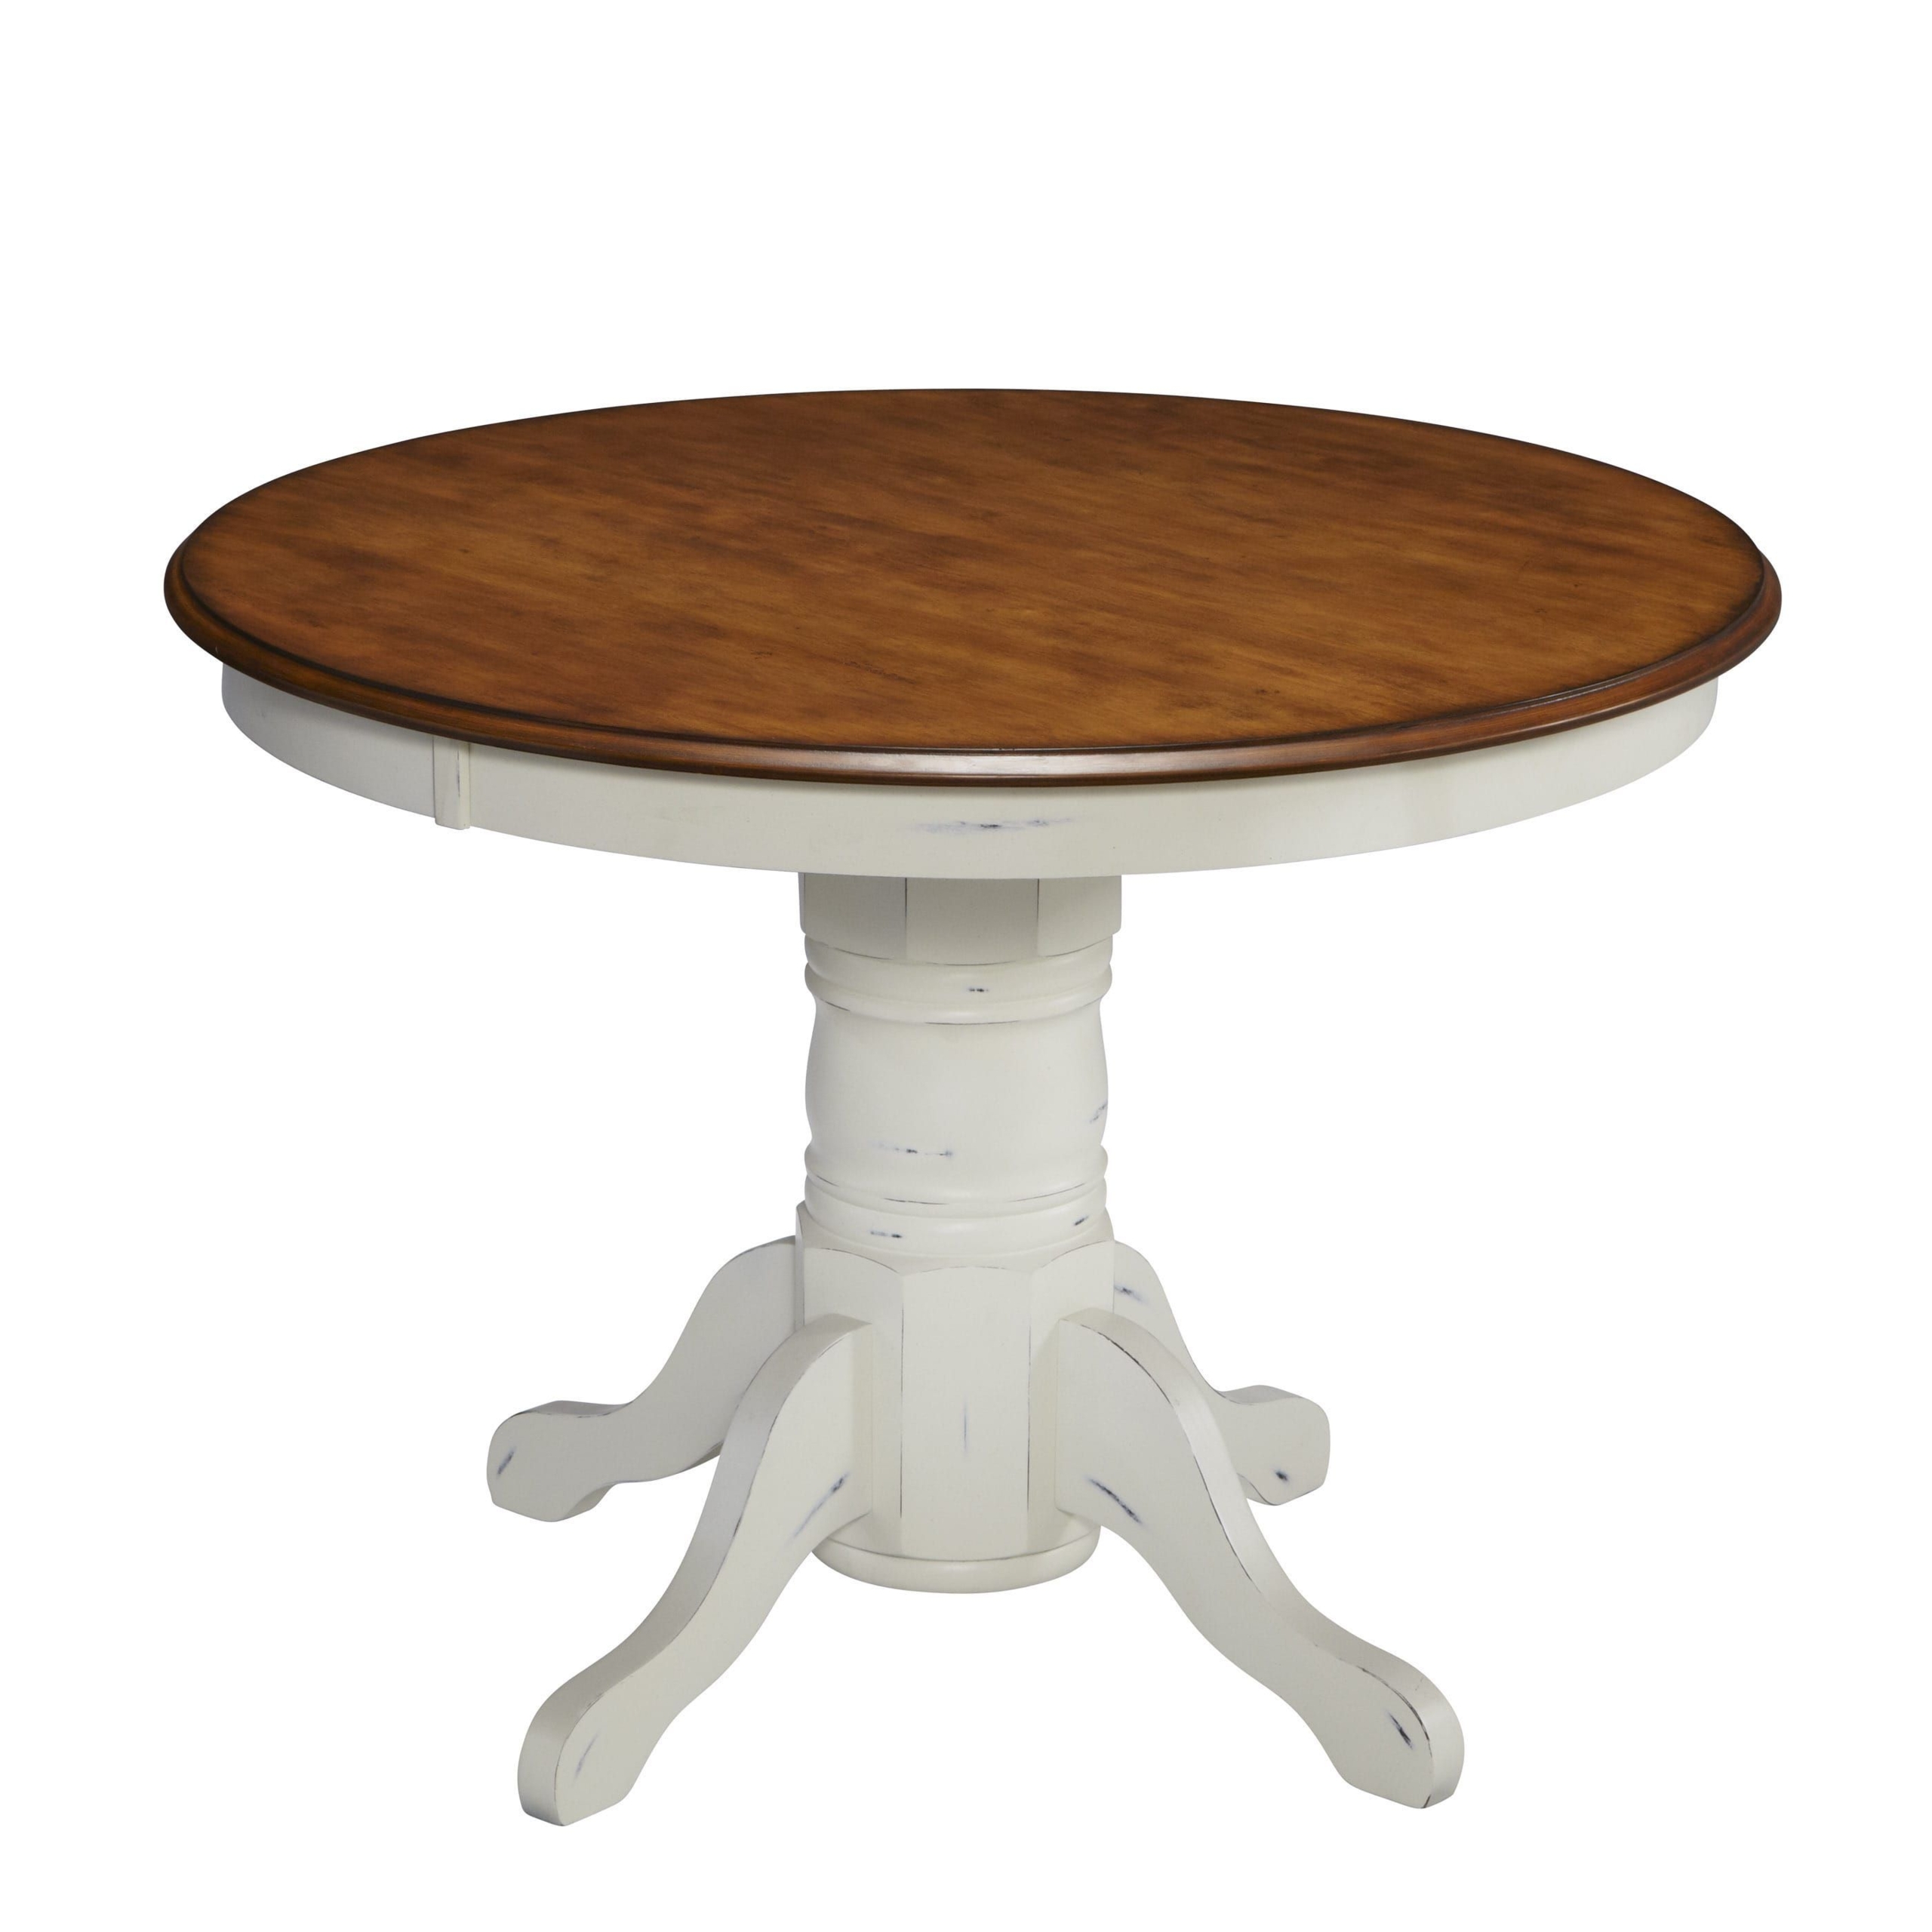 Home Styles 5518-30 The French Countryside Pedestal Table, Oak and Rubbed White